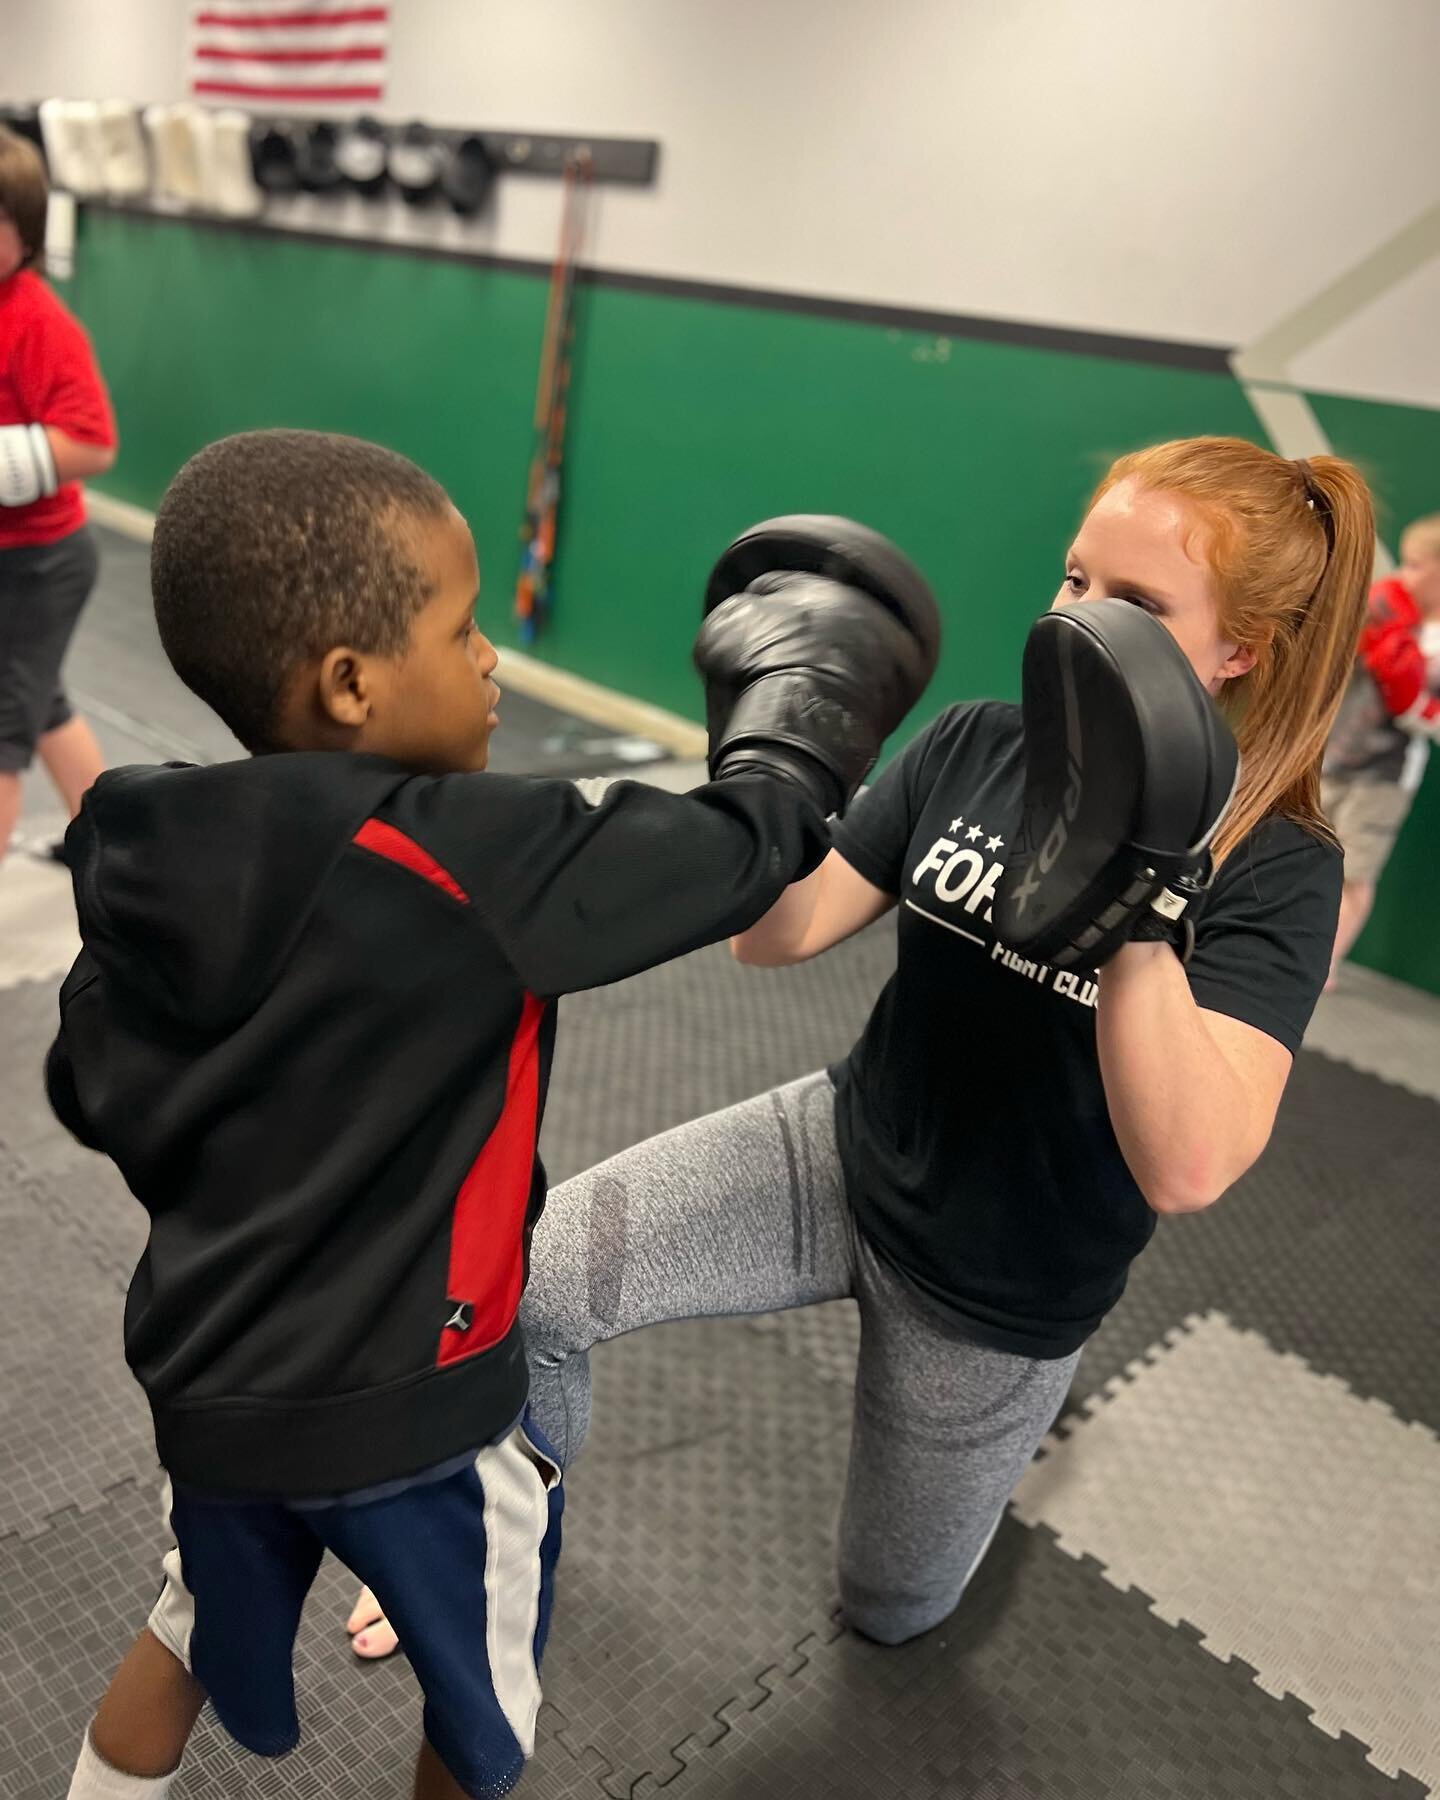 Kids Striking classes are the best 🤩 5:30 PM Monday-Friday! Ages 5-11. Love our young fighters!
&bull;
&bull;
&bull;
&bull;
&bull;
#boxing #kickboxing #mma #fitness #fitfam #fightfam #confidence #competition #training #kids #striking #teamFortify